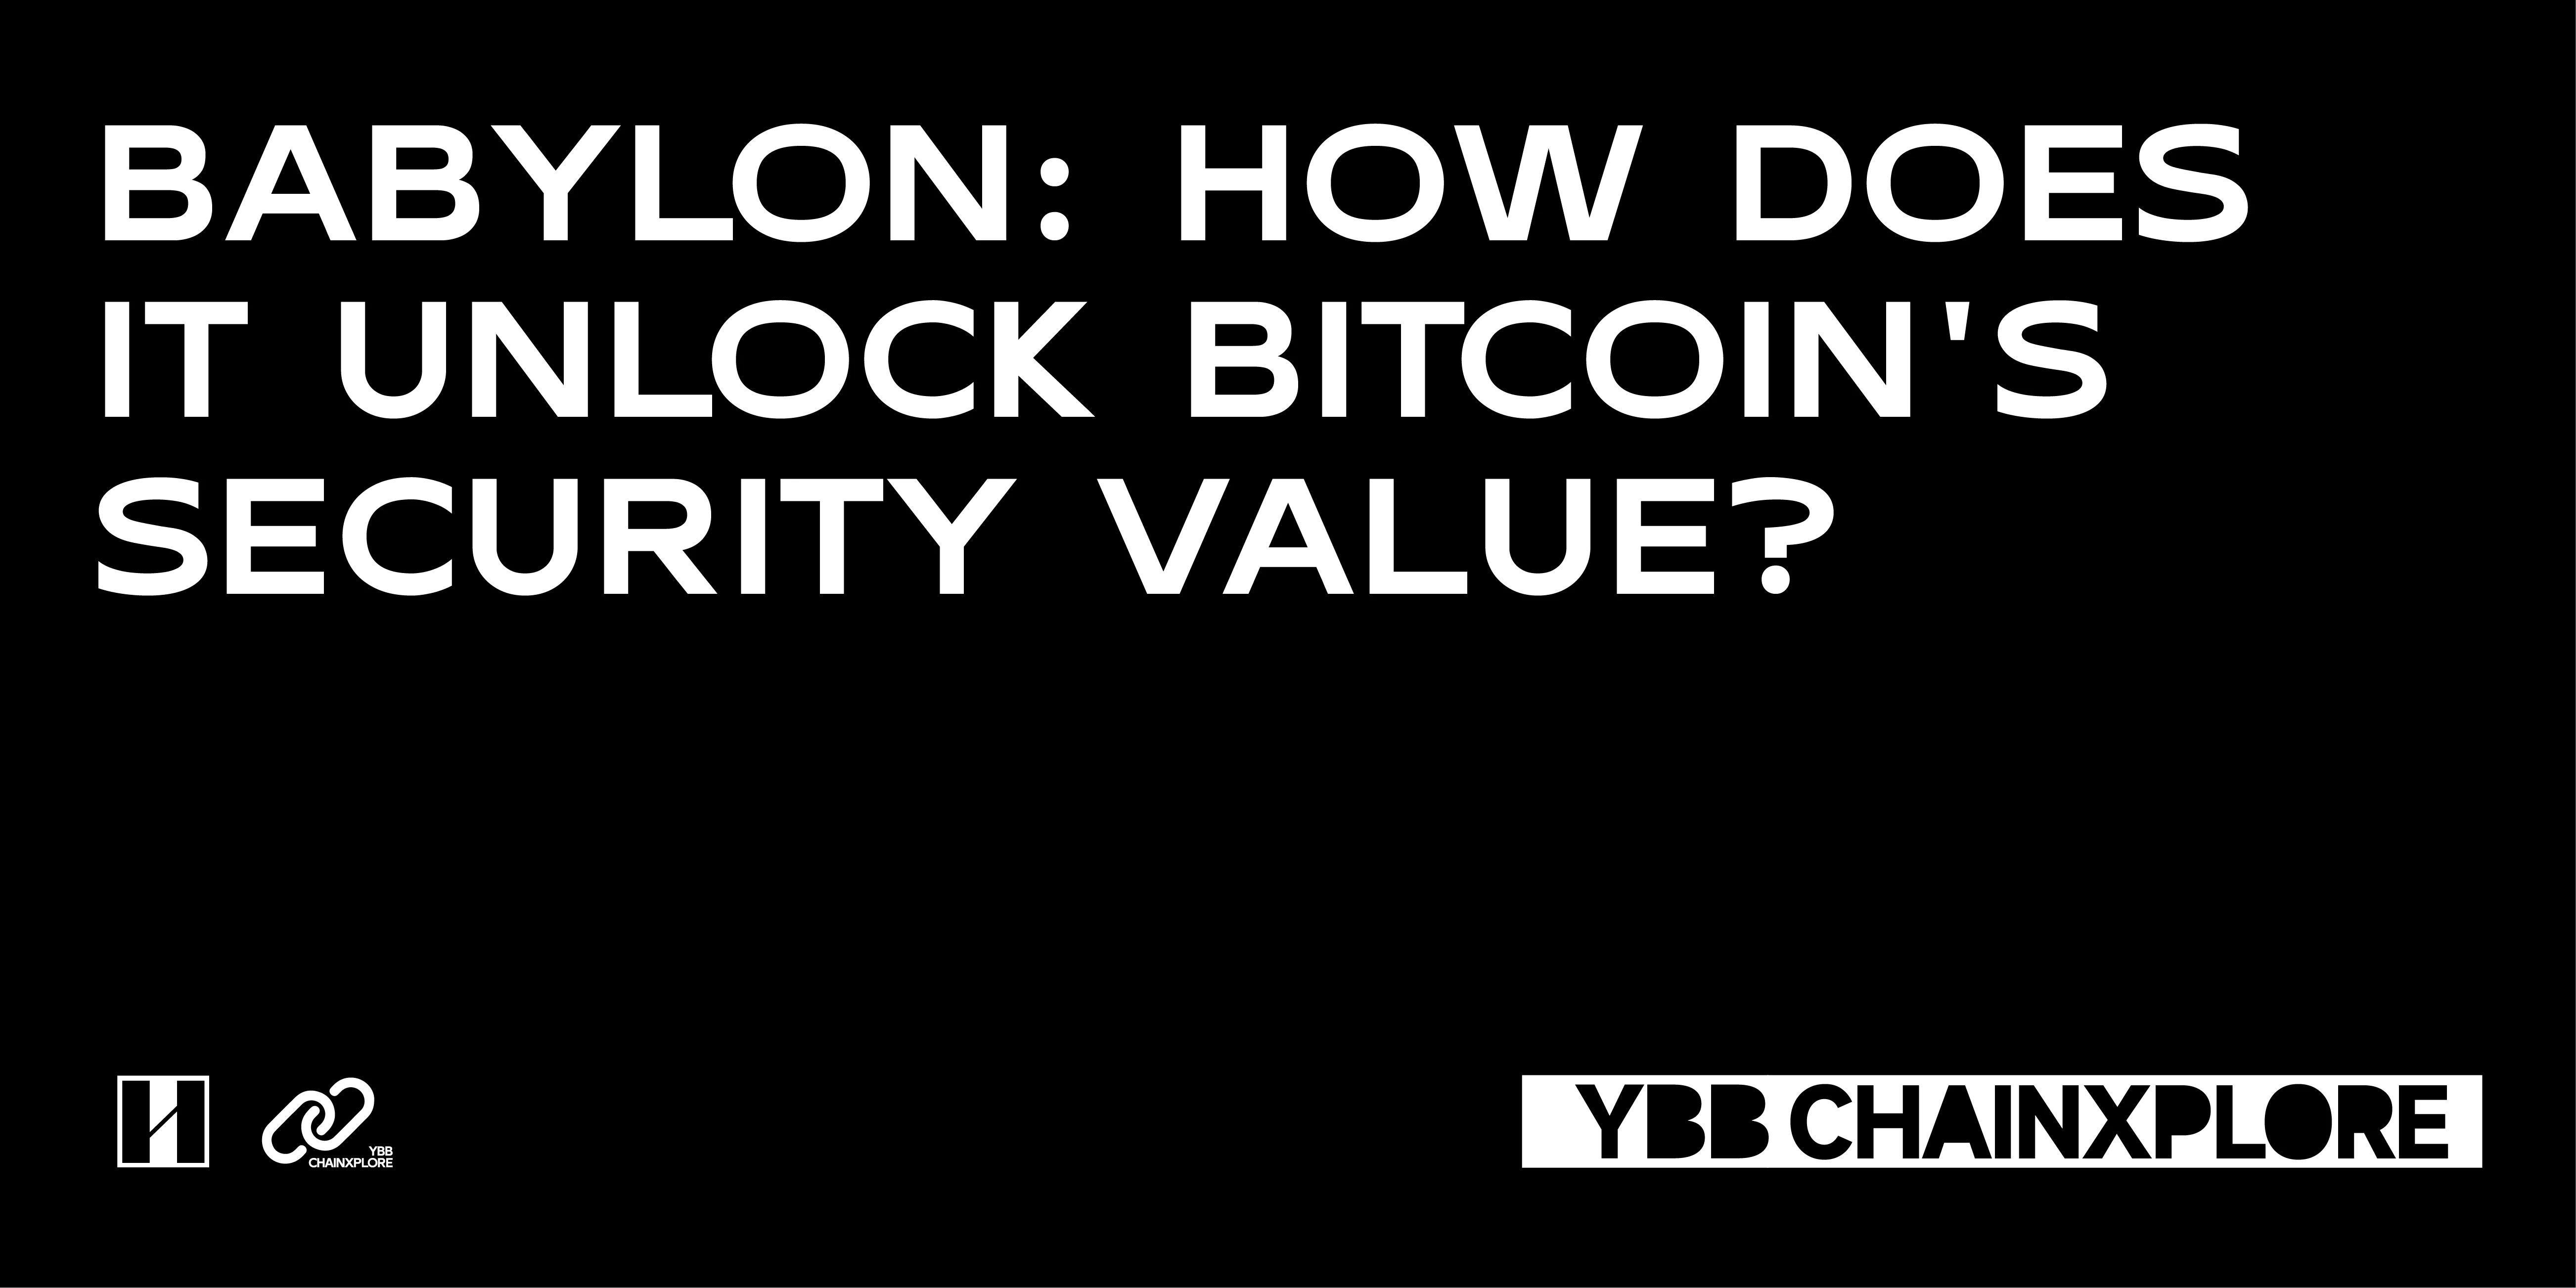 Babylon: How to unlock the security value of Bitcoin?